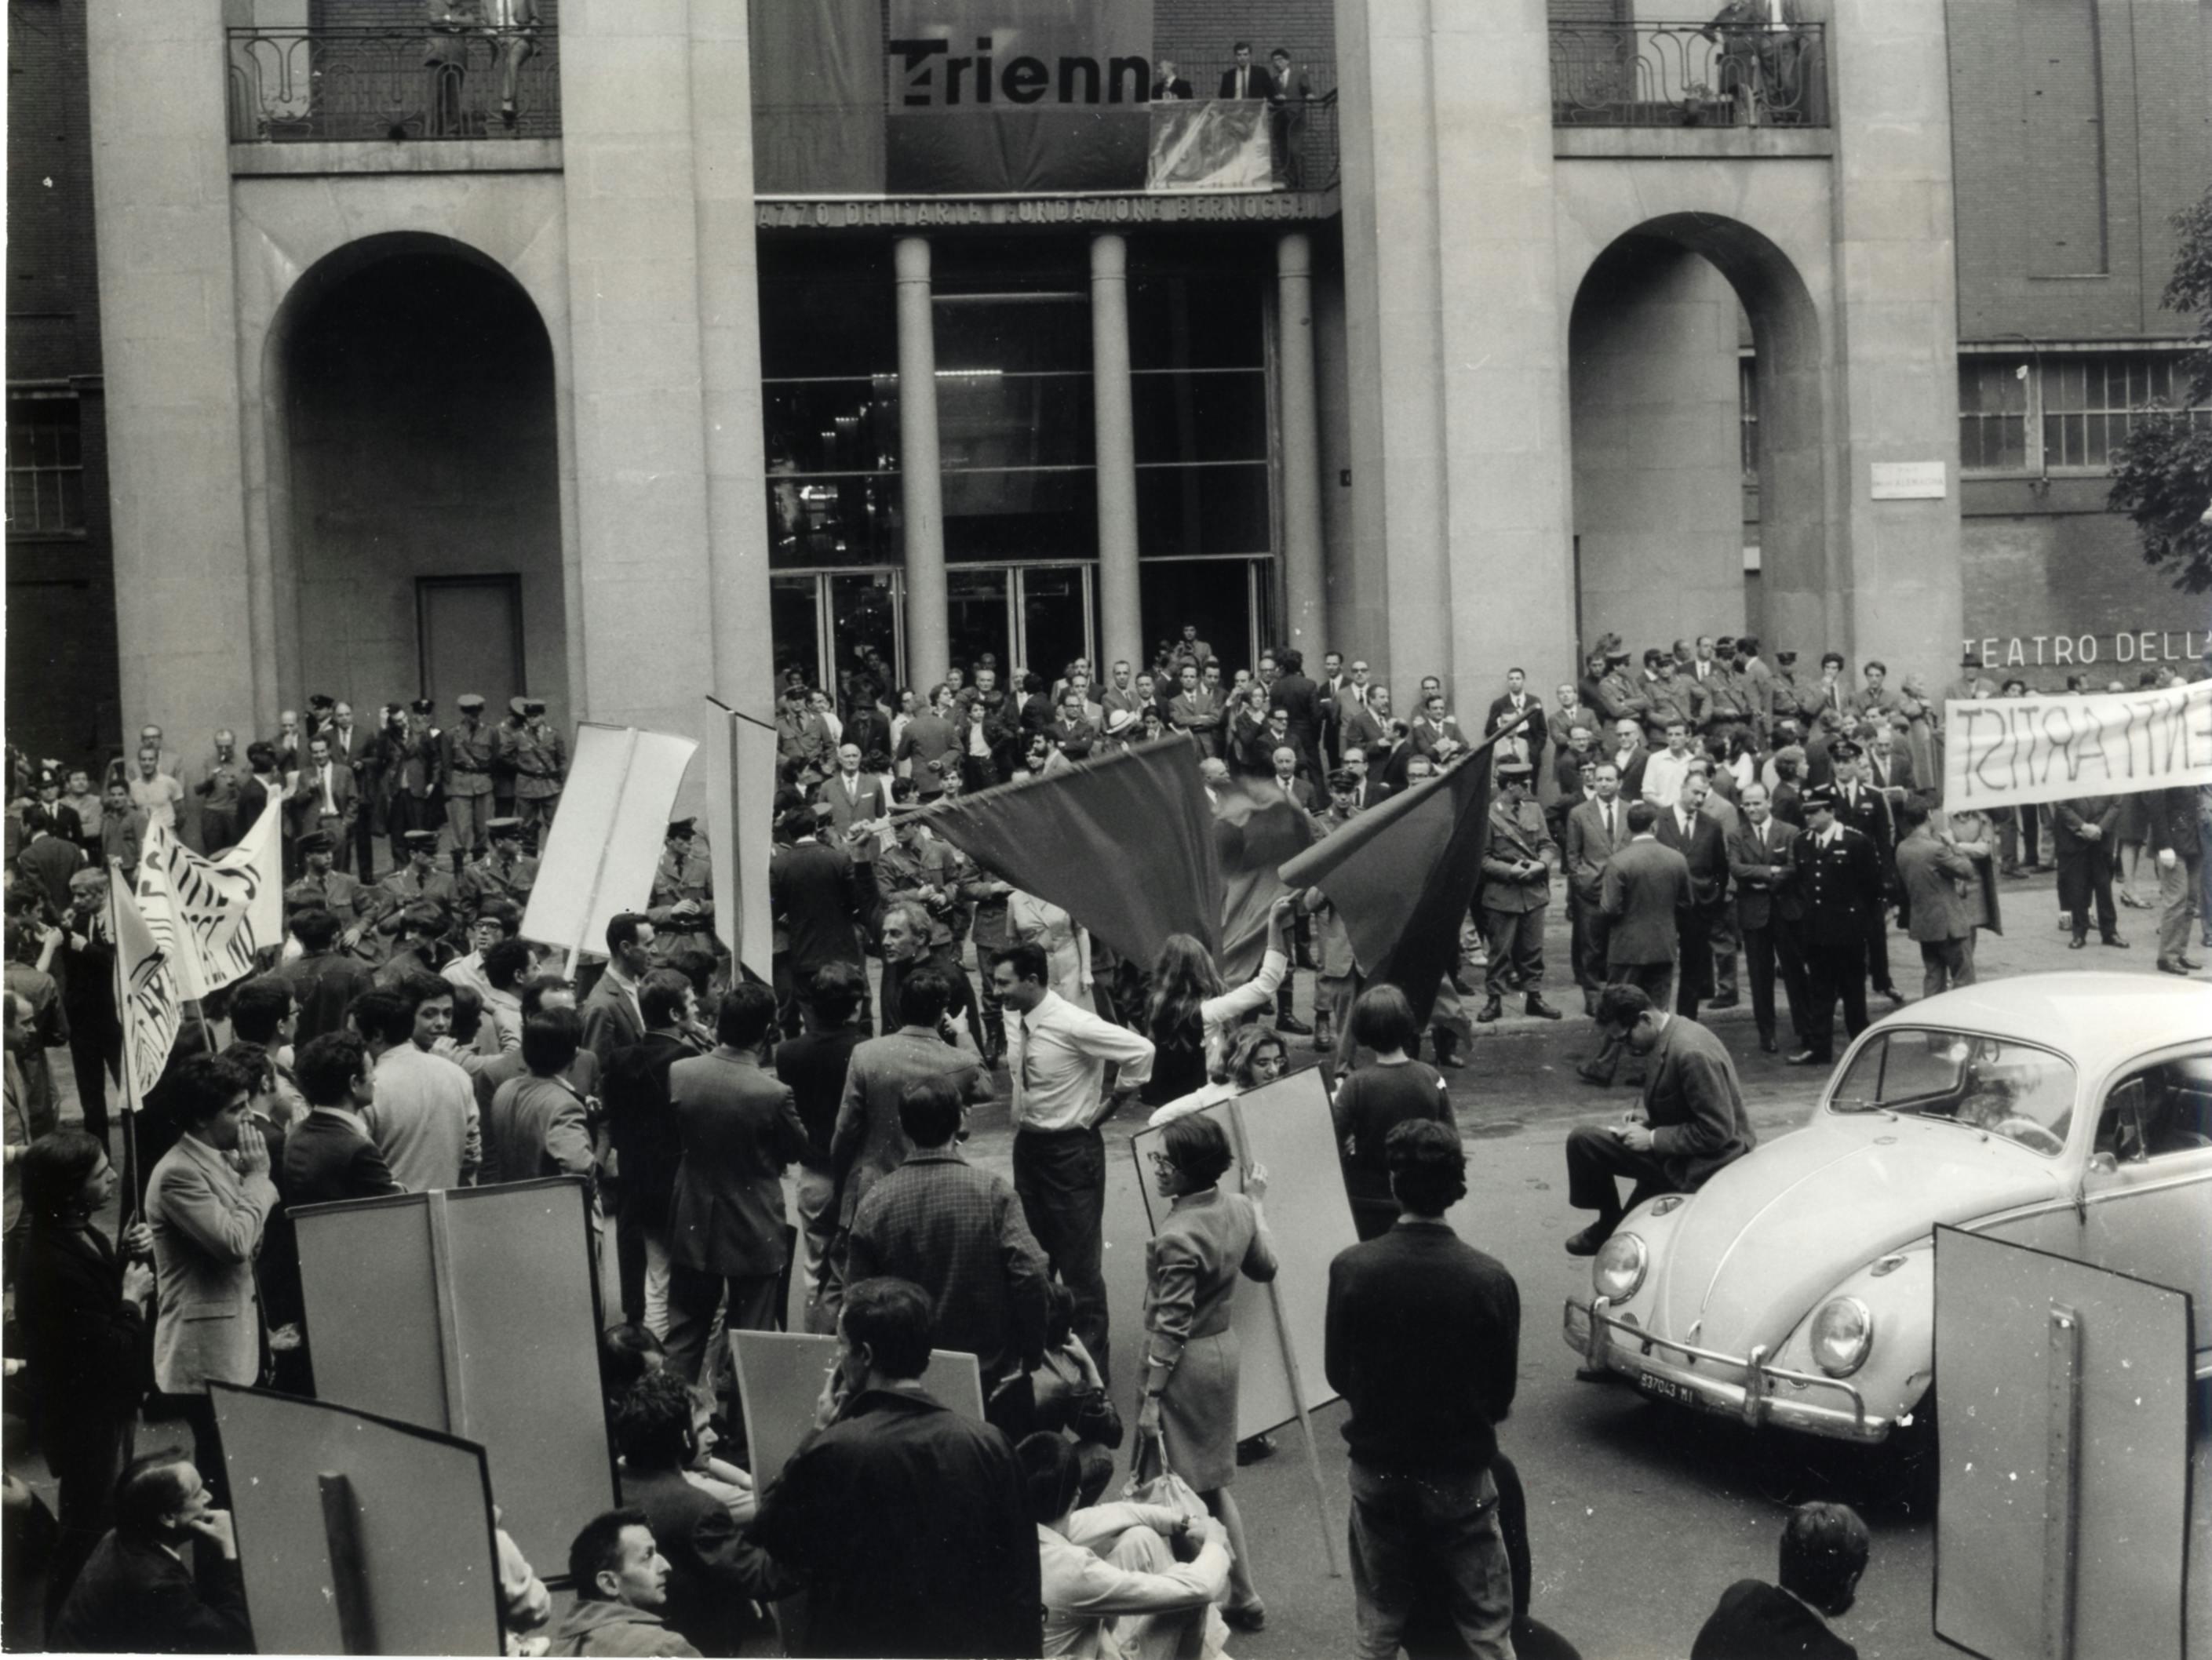 1968: The main facade of the Palazzo dell’Arte after the occupation of the 14th Triennale